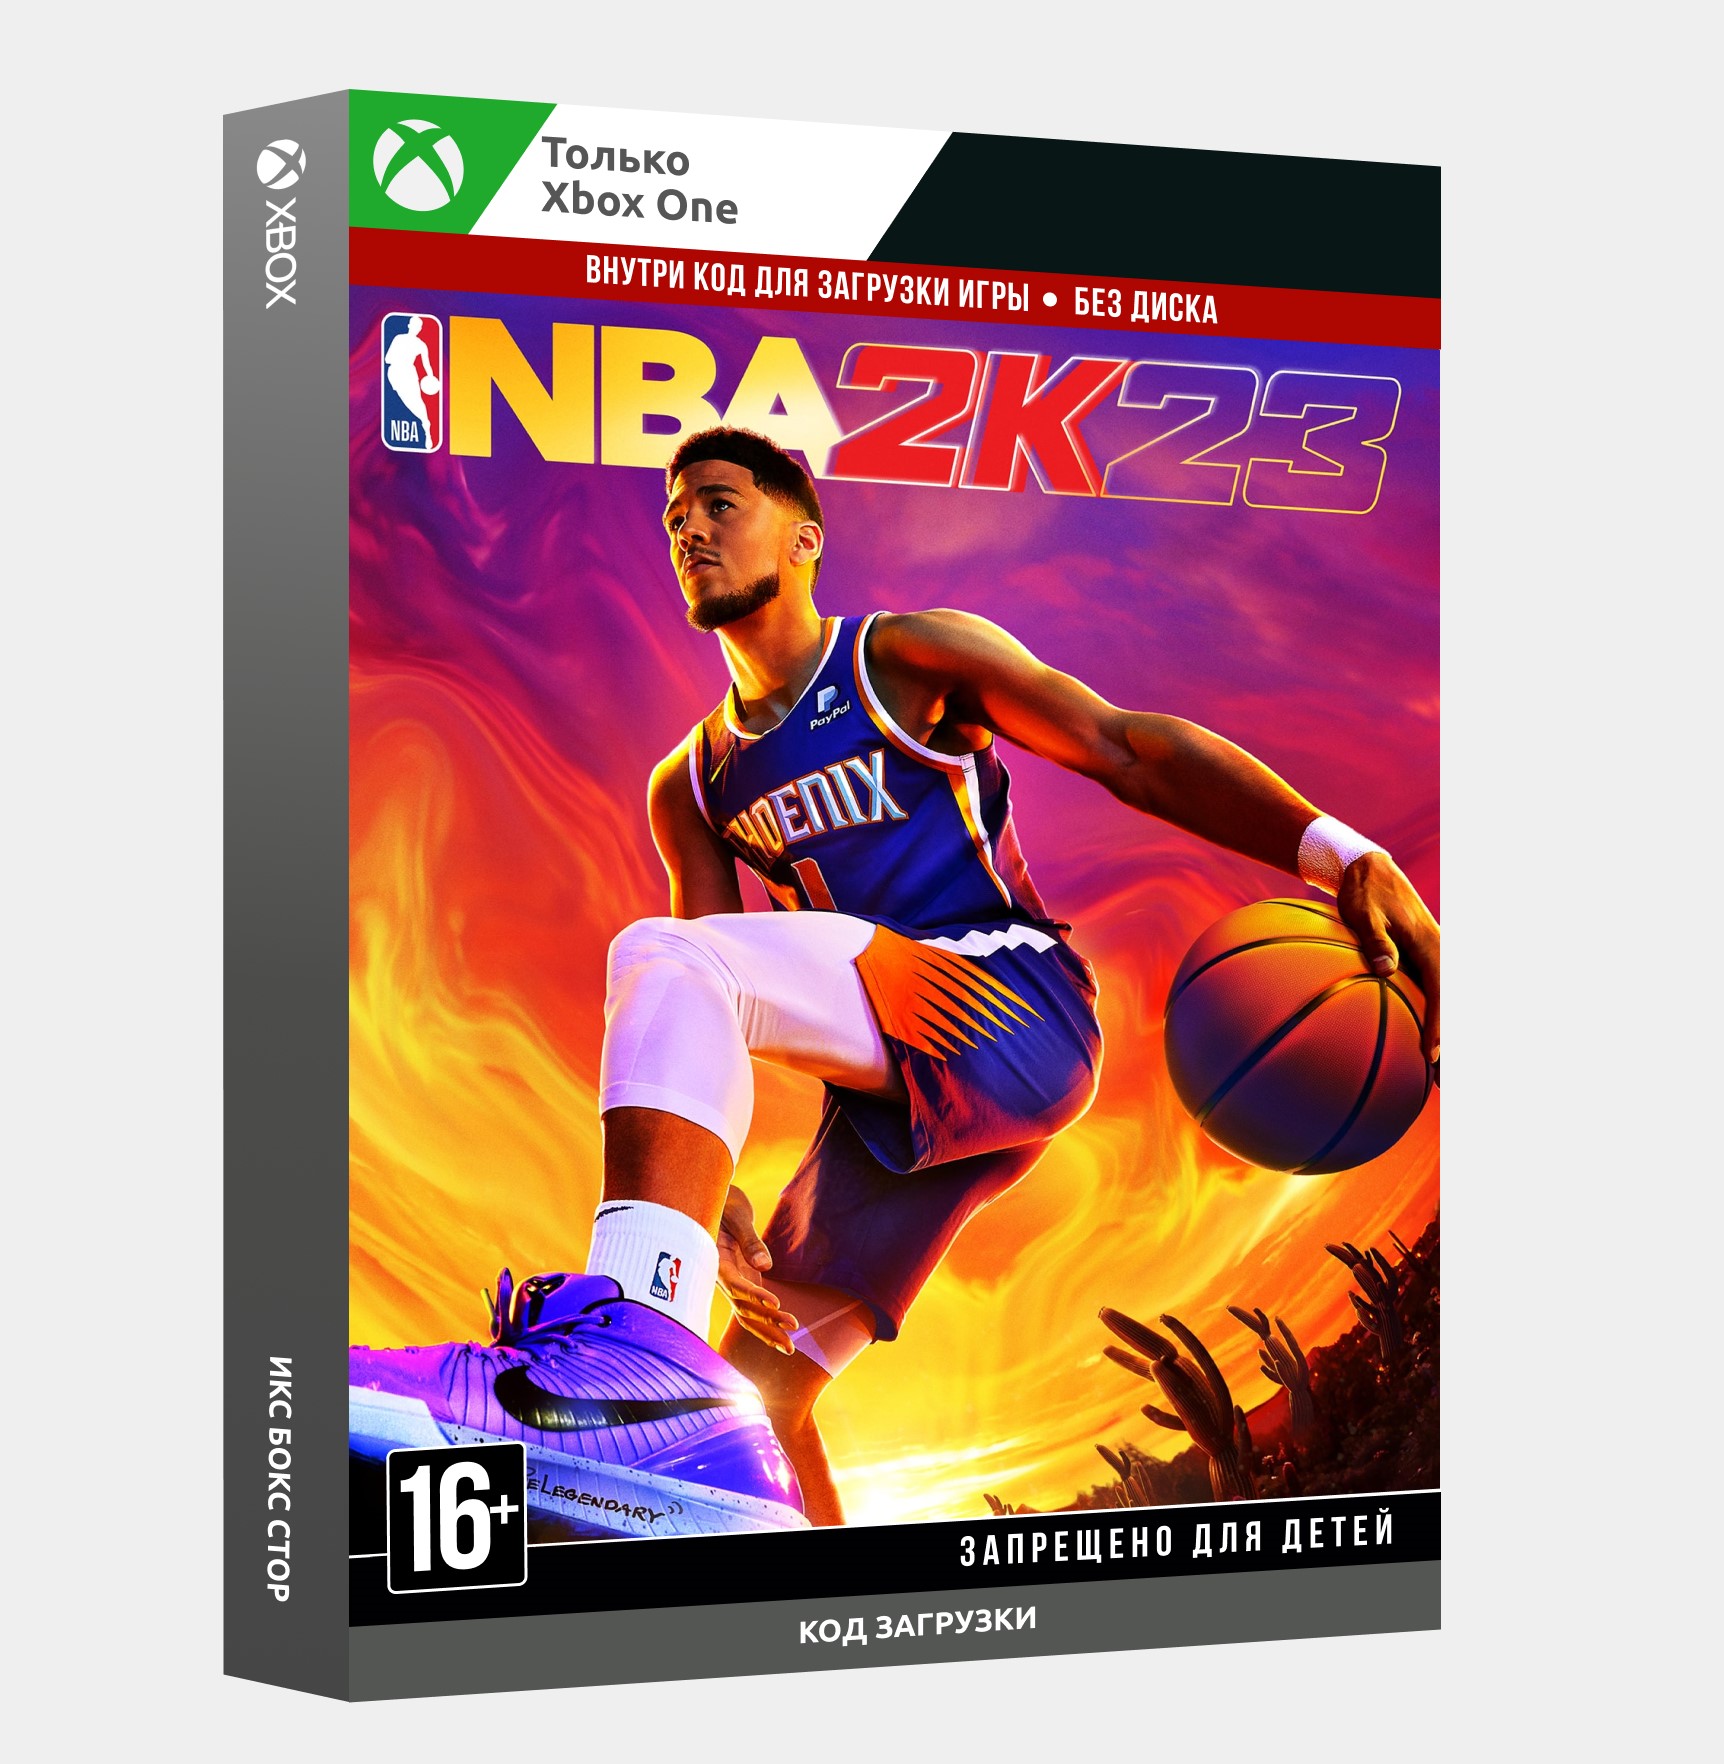 Buy Key NBA 2K23 Standard Edition (Xbox One) and download